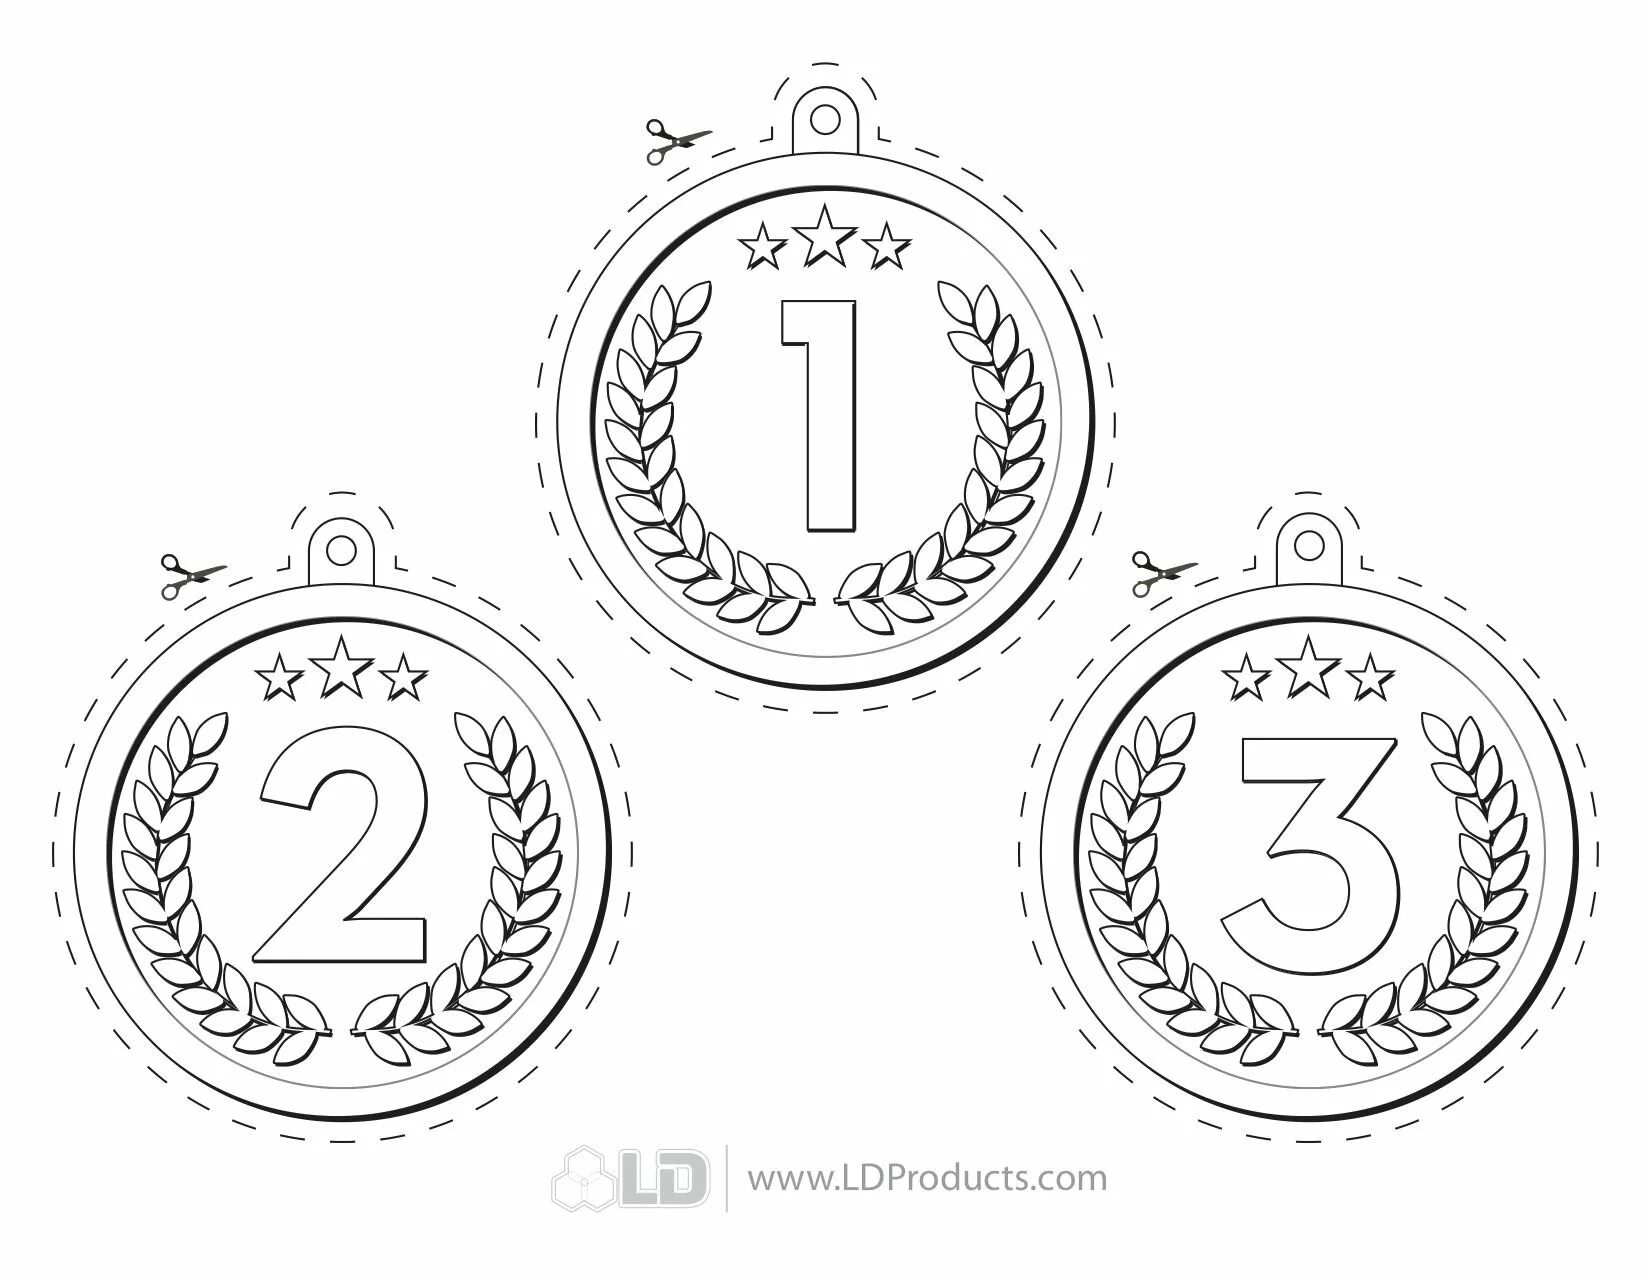 Amazing medal coloring page